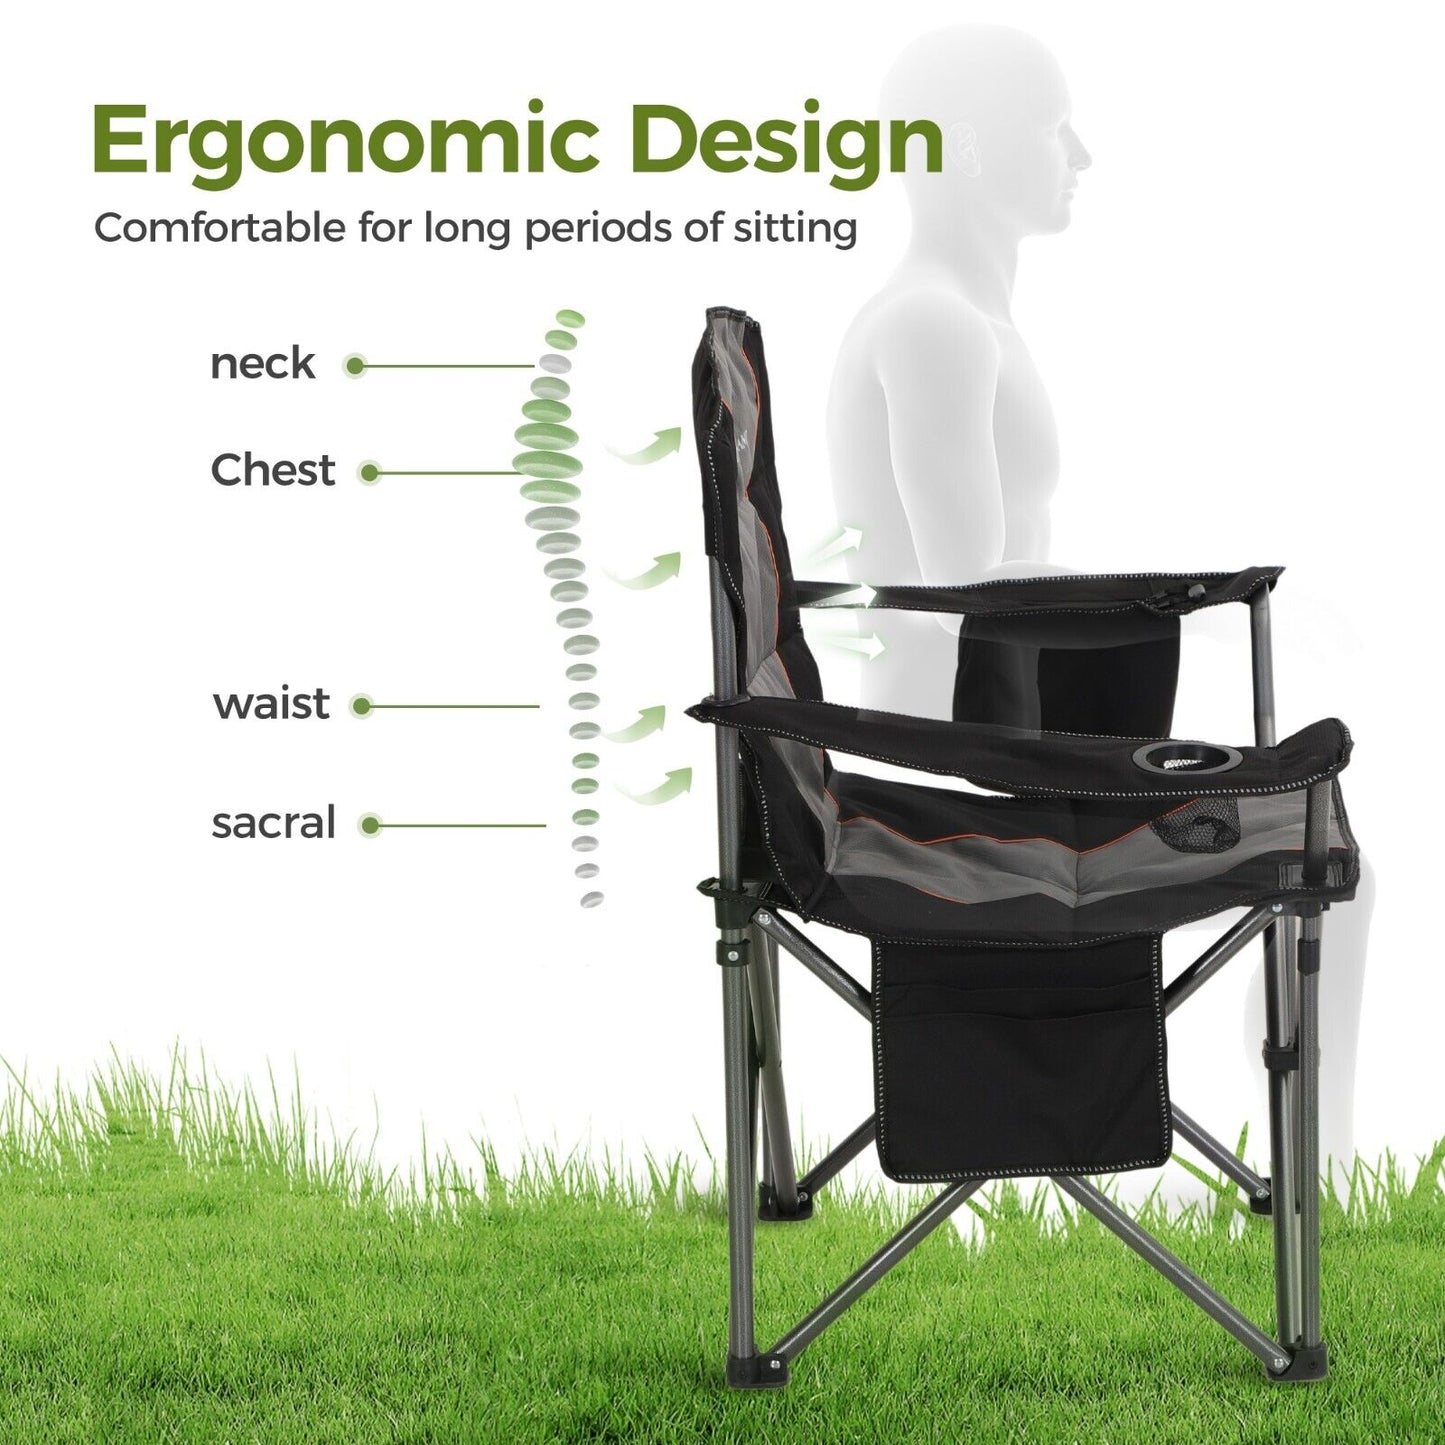 Camping Chair - Heavy Duty | 450 lb Weight Capacity, Lightweight, Cooler Bag, Size L